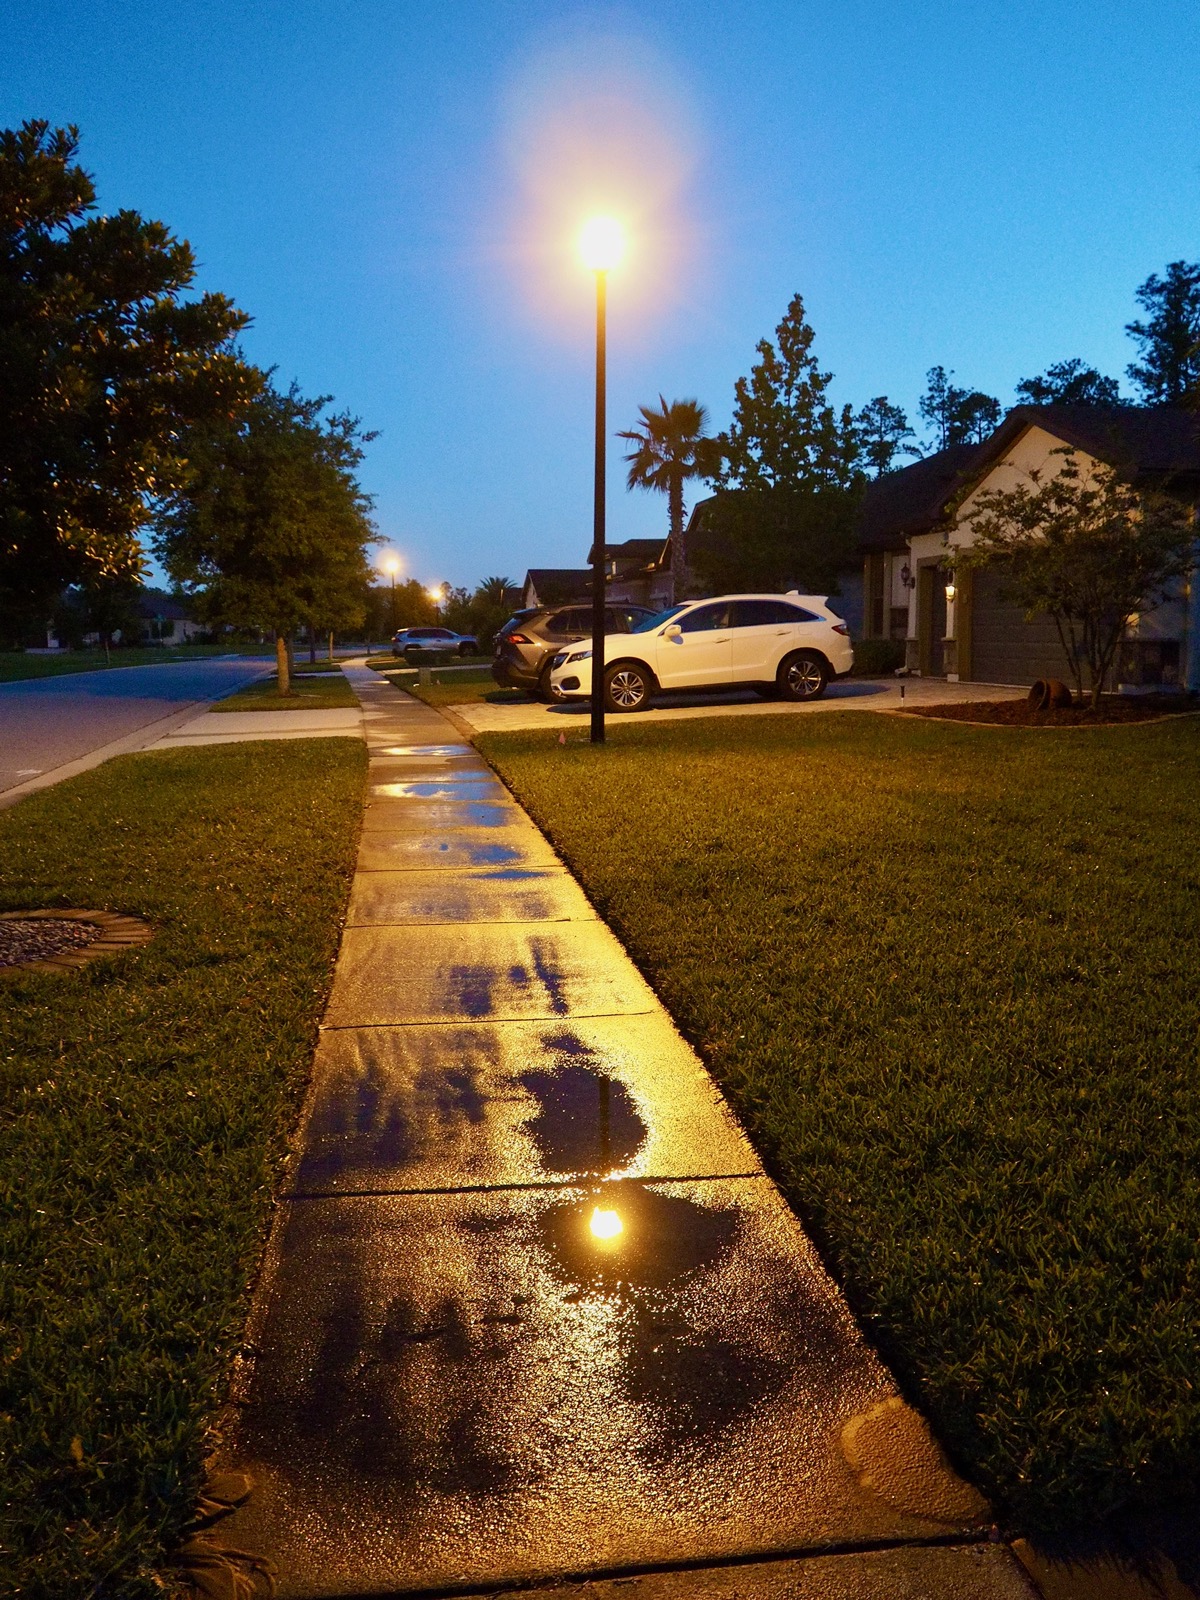 Street lamp reflected in a sidewalk wet from lawn sprinklers with cars in driveways